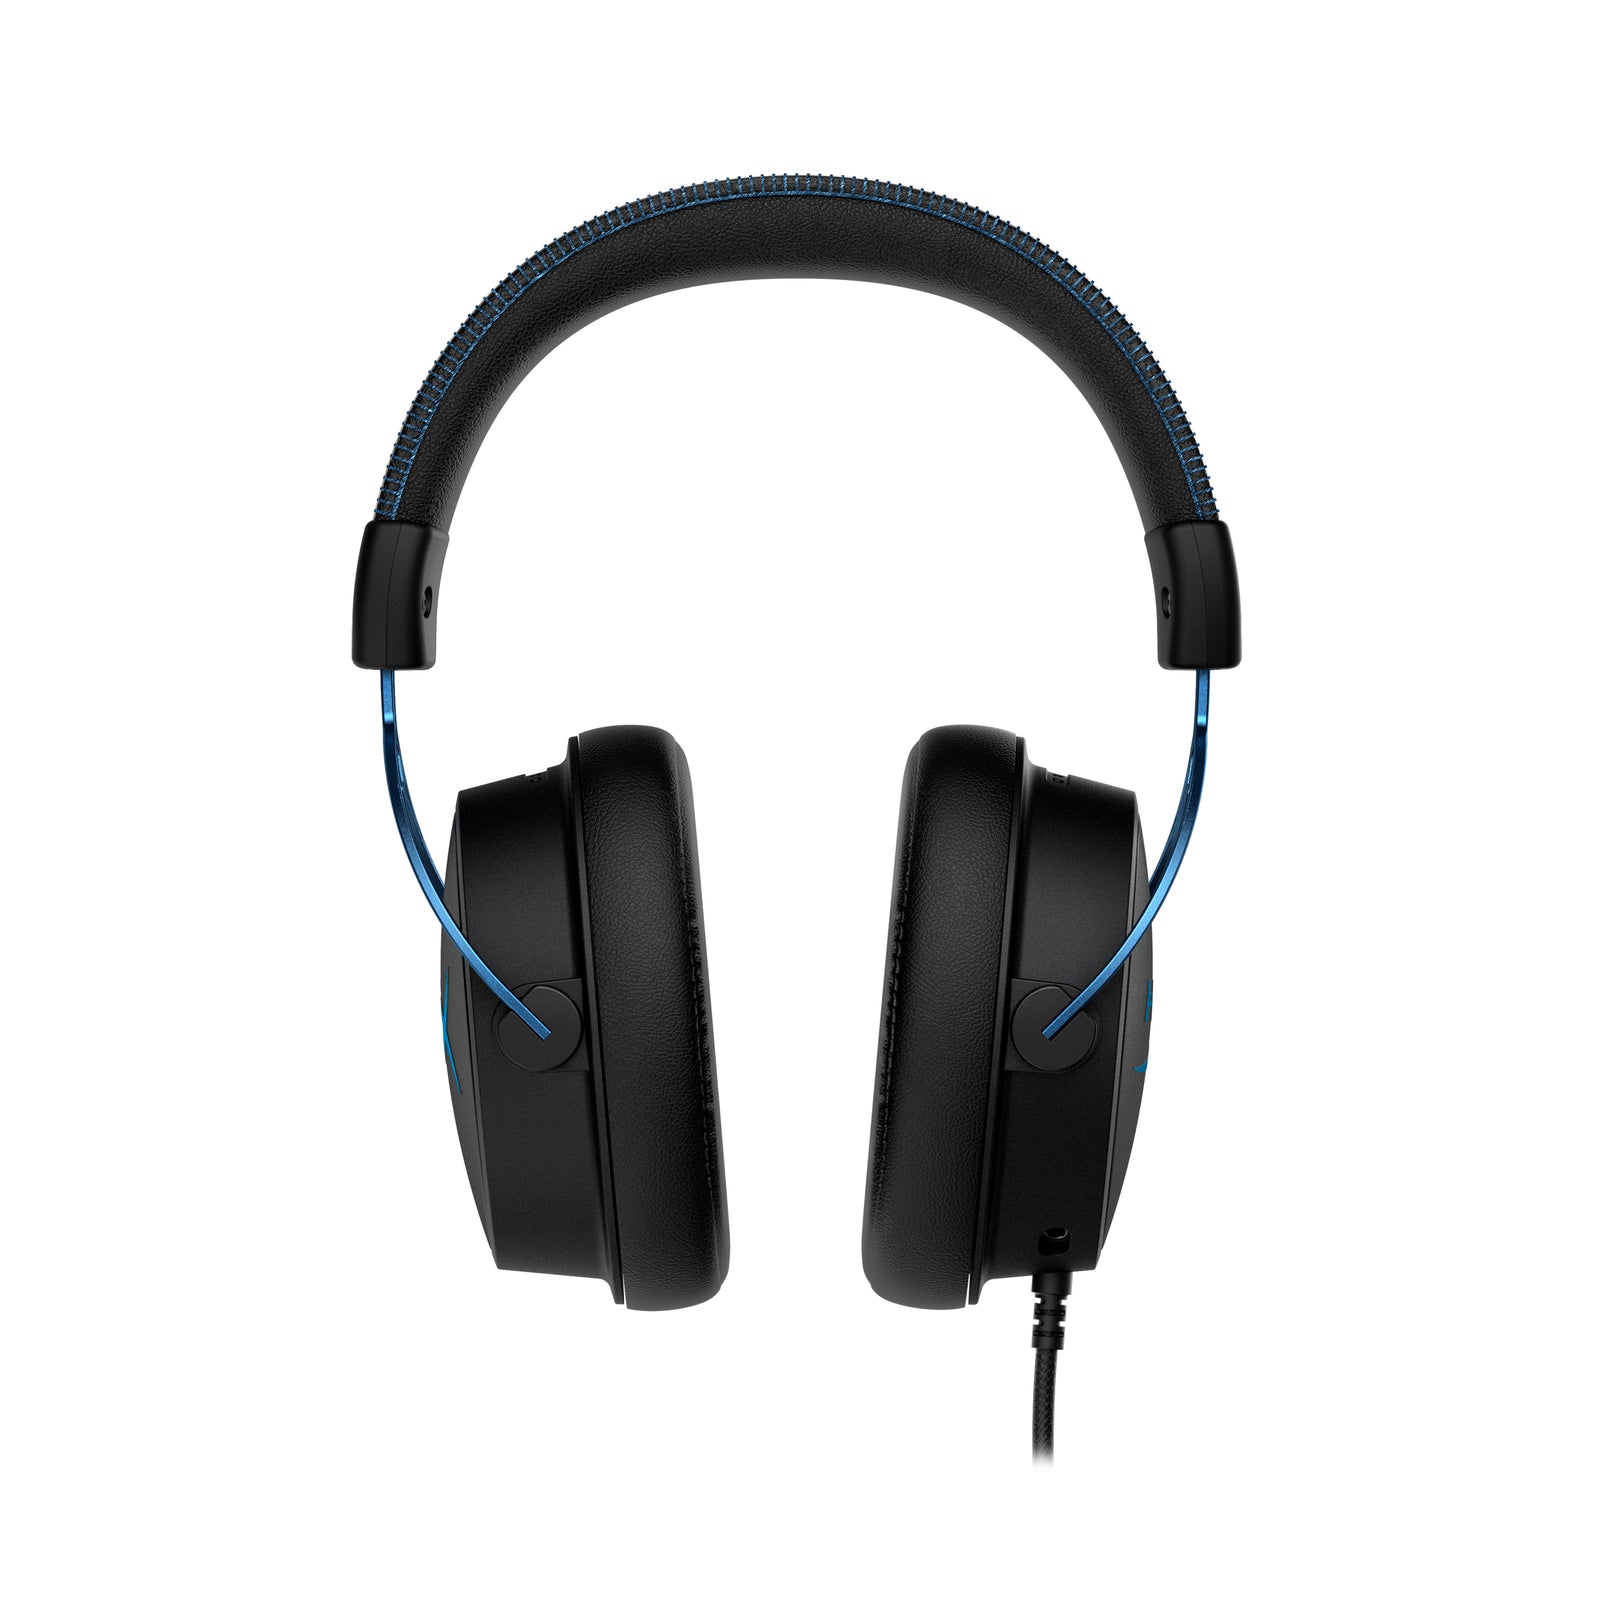 Cloud Alpha S – USB Gaming Headset with 7.1 Surround Sound | HyperX